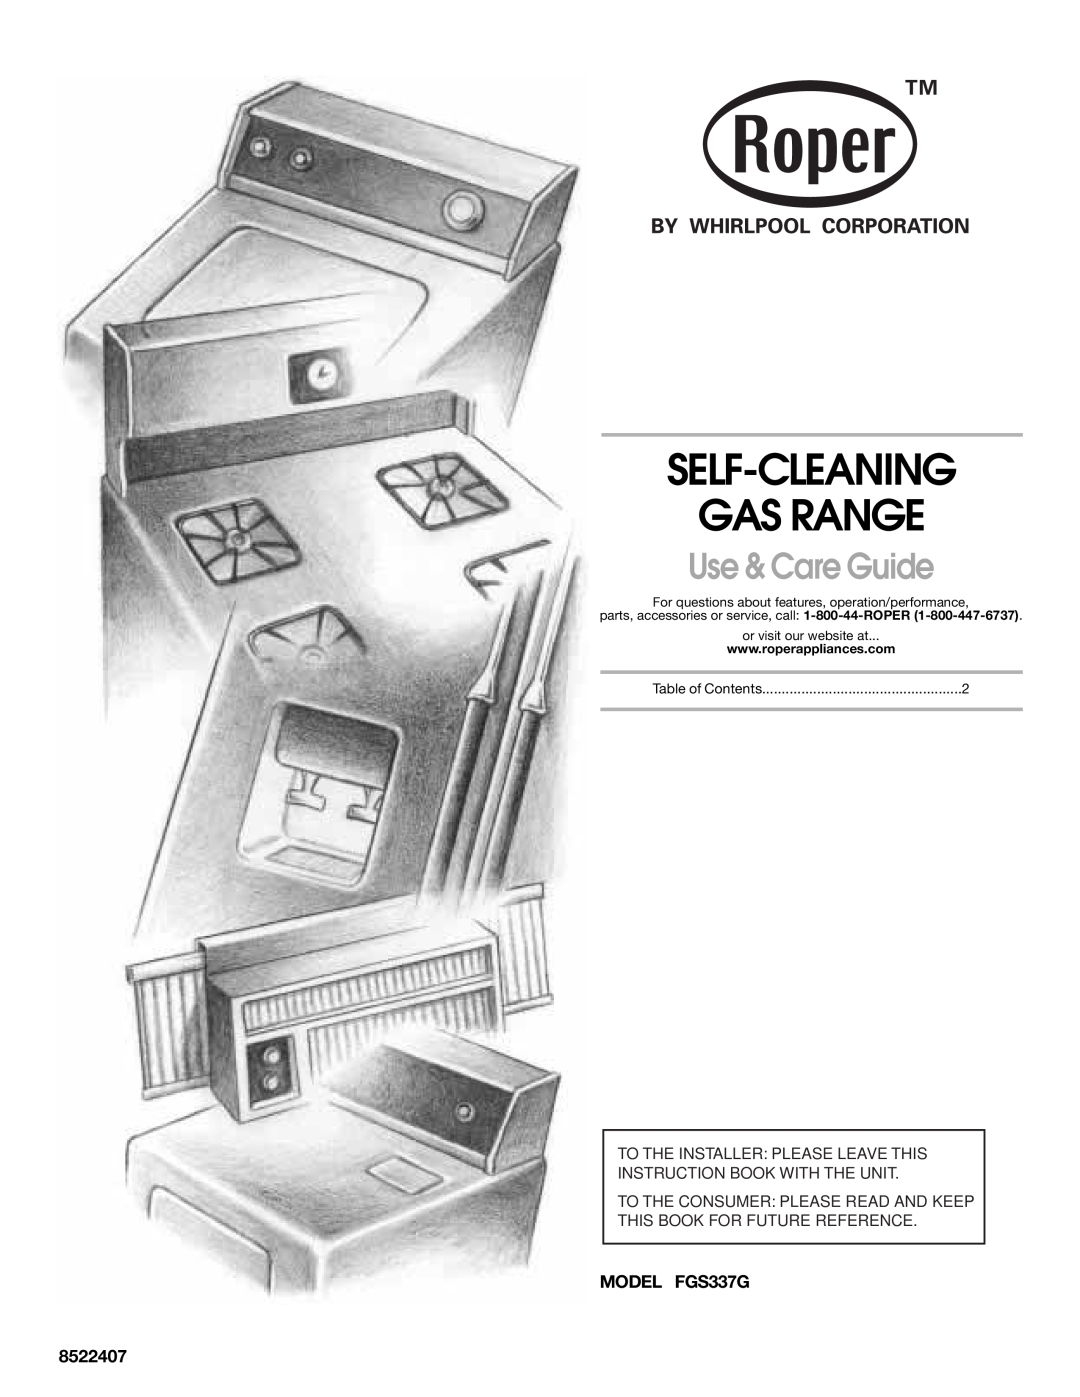 Whirlpool 8522407 manual Self-Cleaning Gas Range, Use & Care Guide, For questions about features, operation/performance 